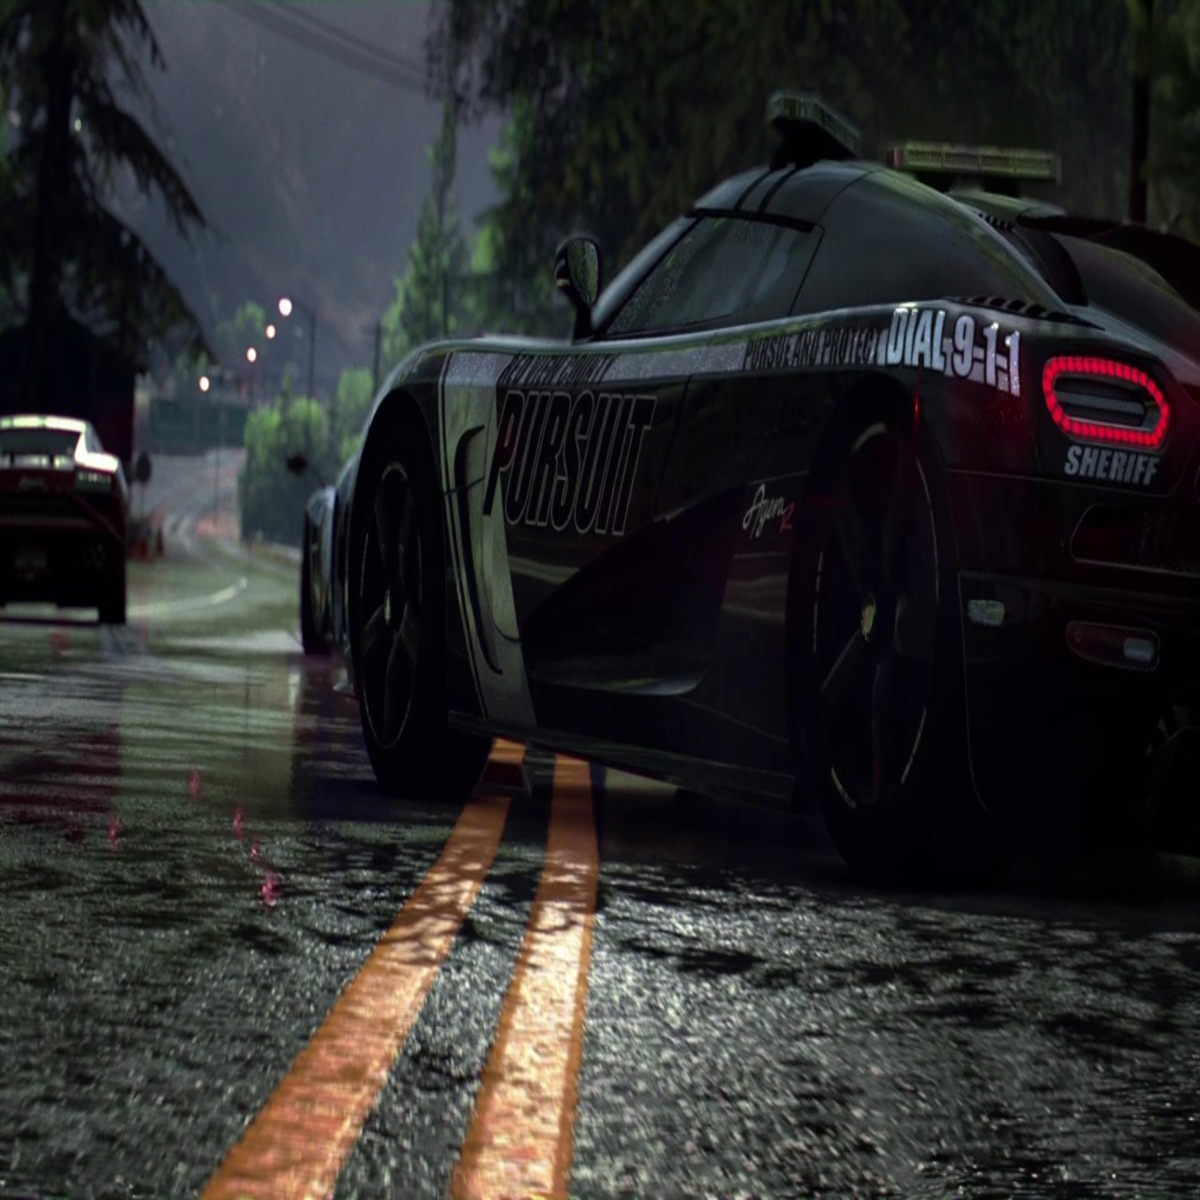 Review: Need for Speed Rivals (PS4) - Hardcore Gamer